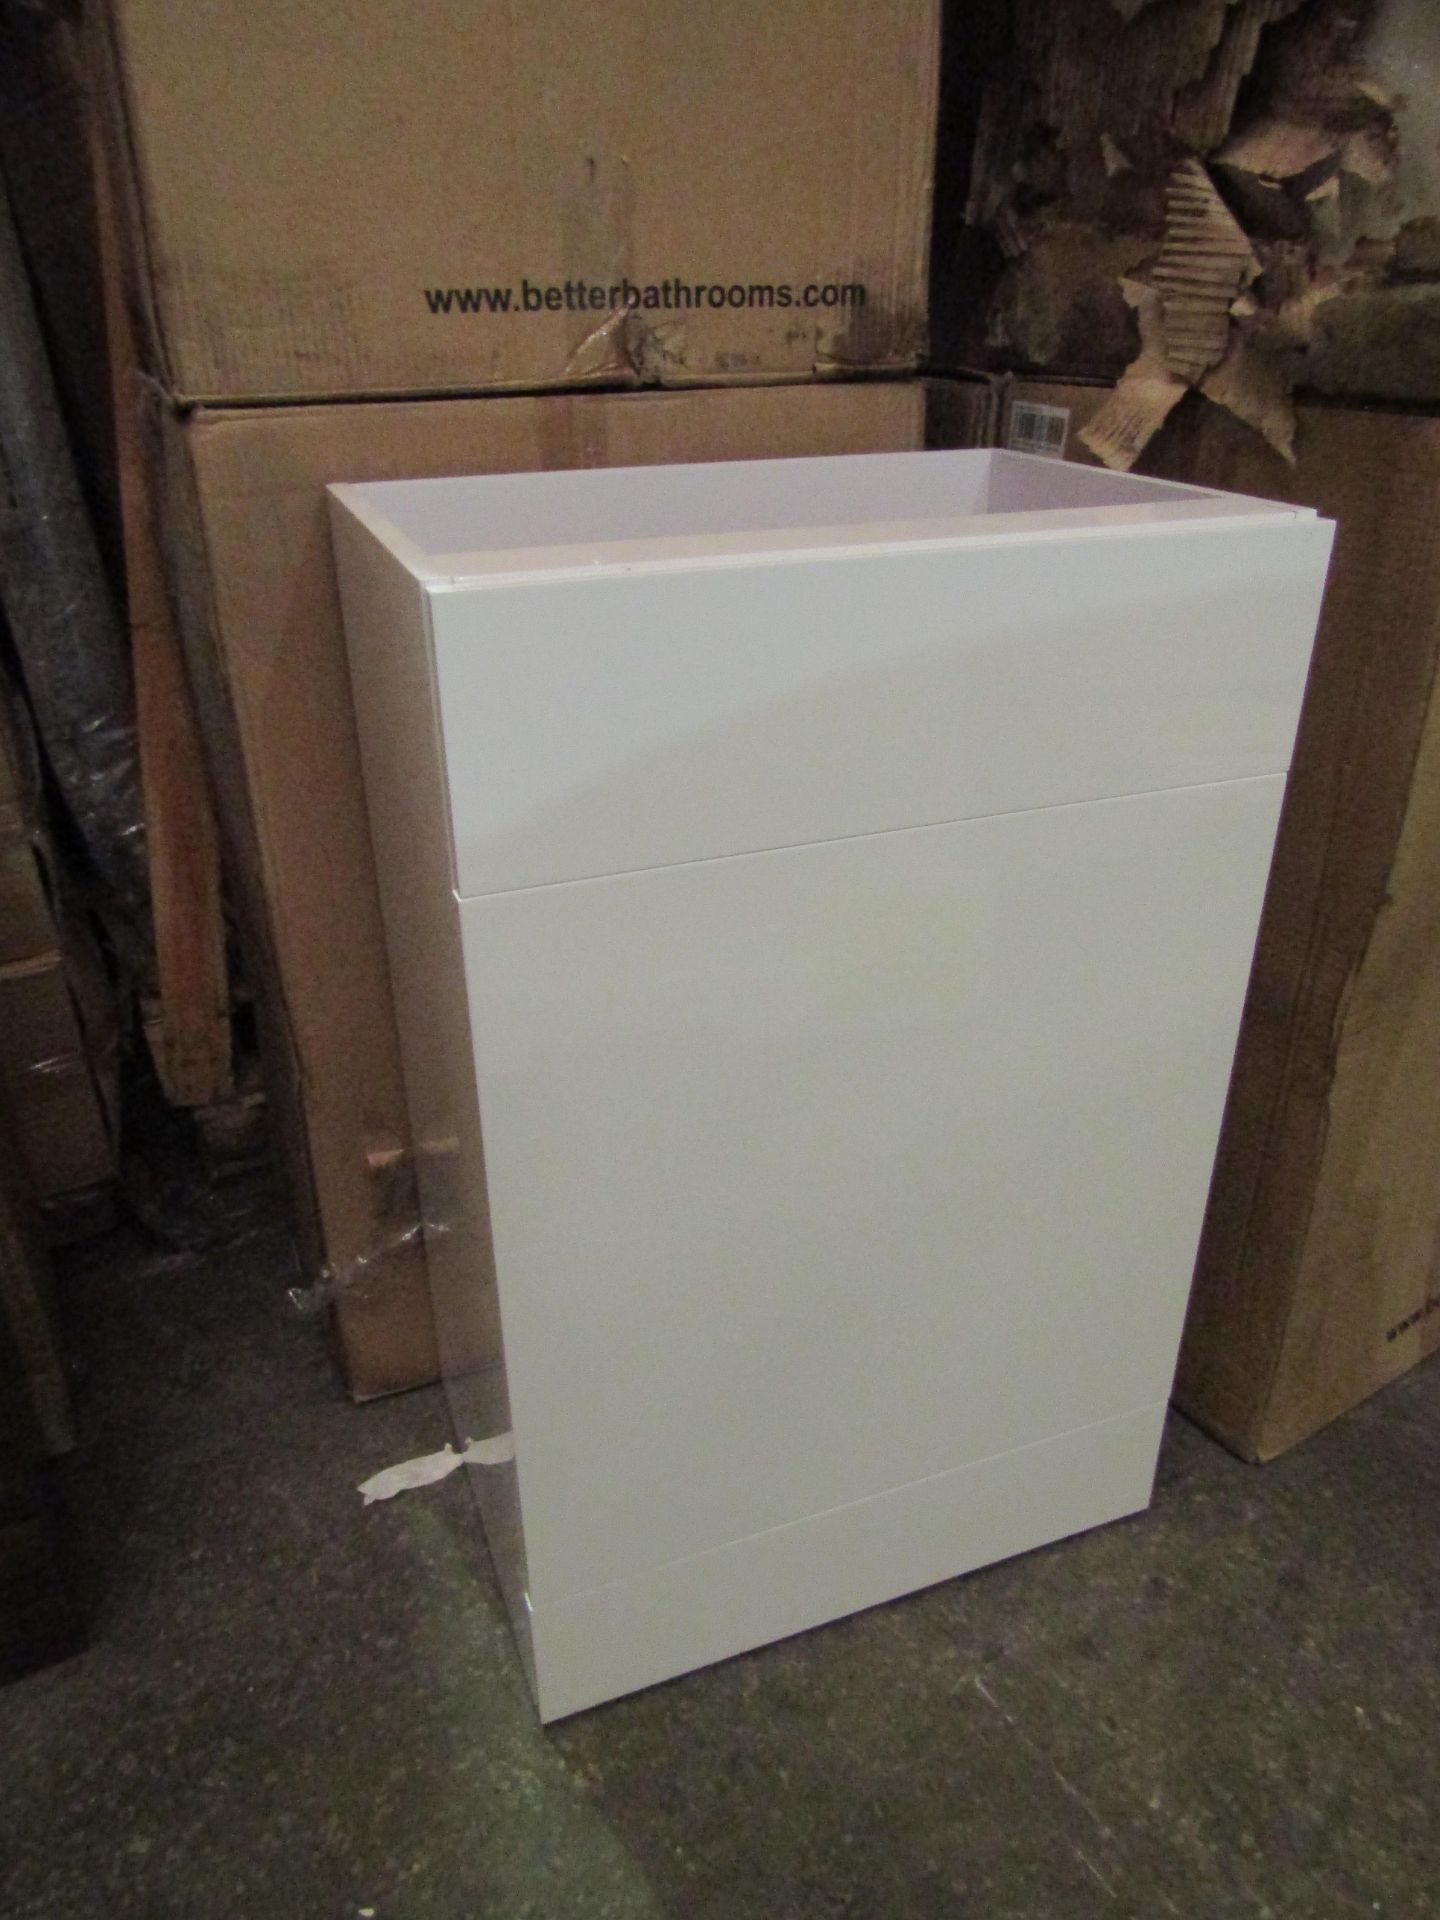 New Kirkwood WC Side Cabinet Gloss White 120cm - New & Boxed.